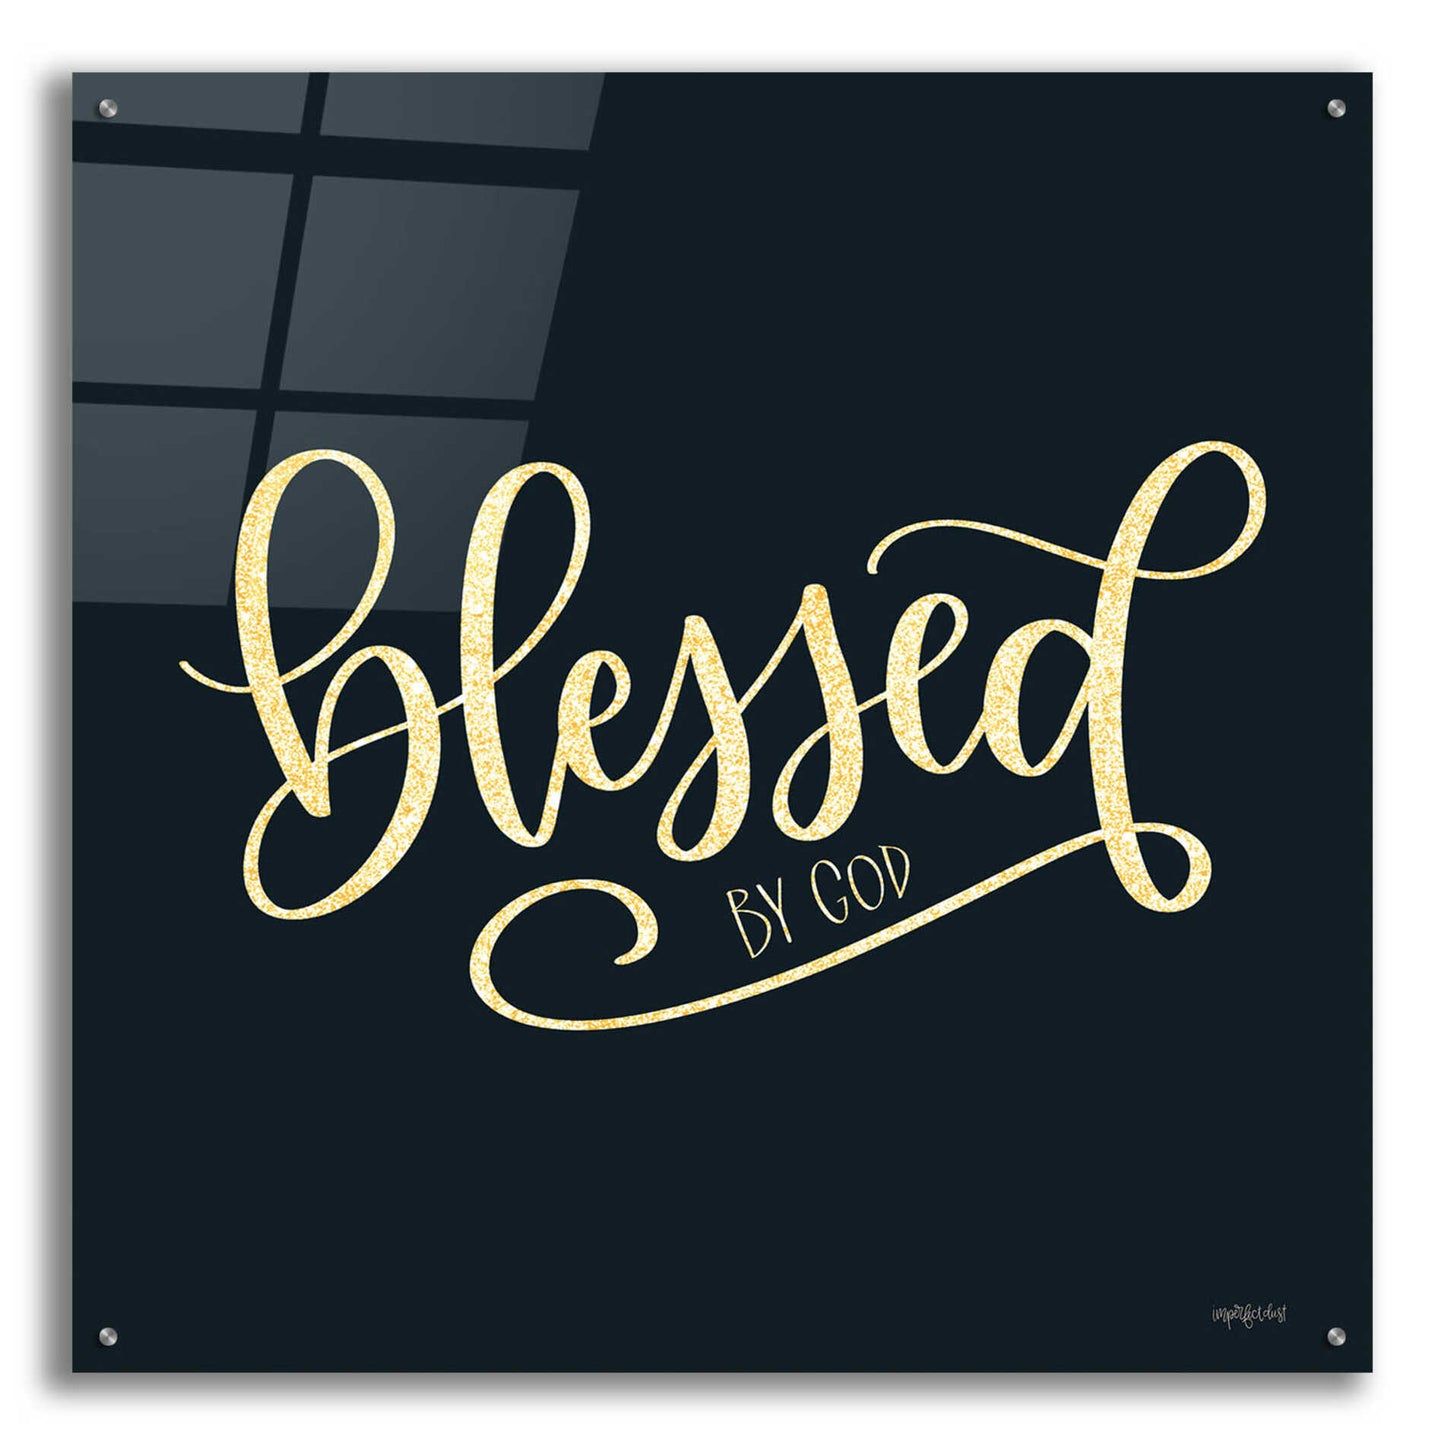 Epic Art 'Blessed By God' by Imperfect Dust, Acrylic Glass Wall Art,36x36